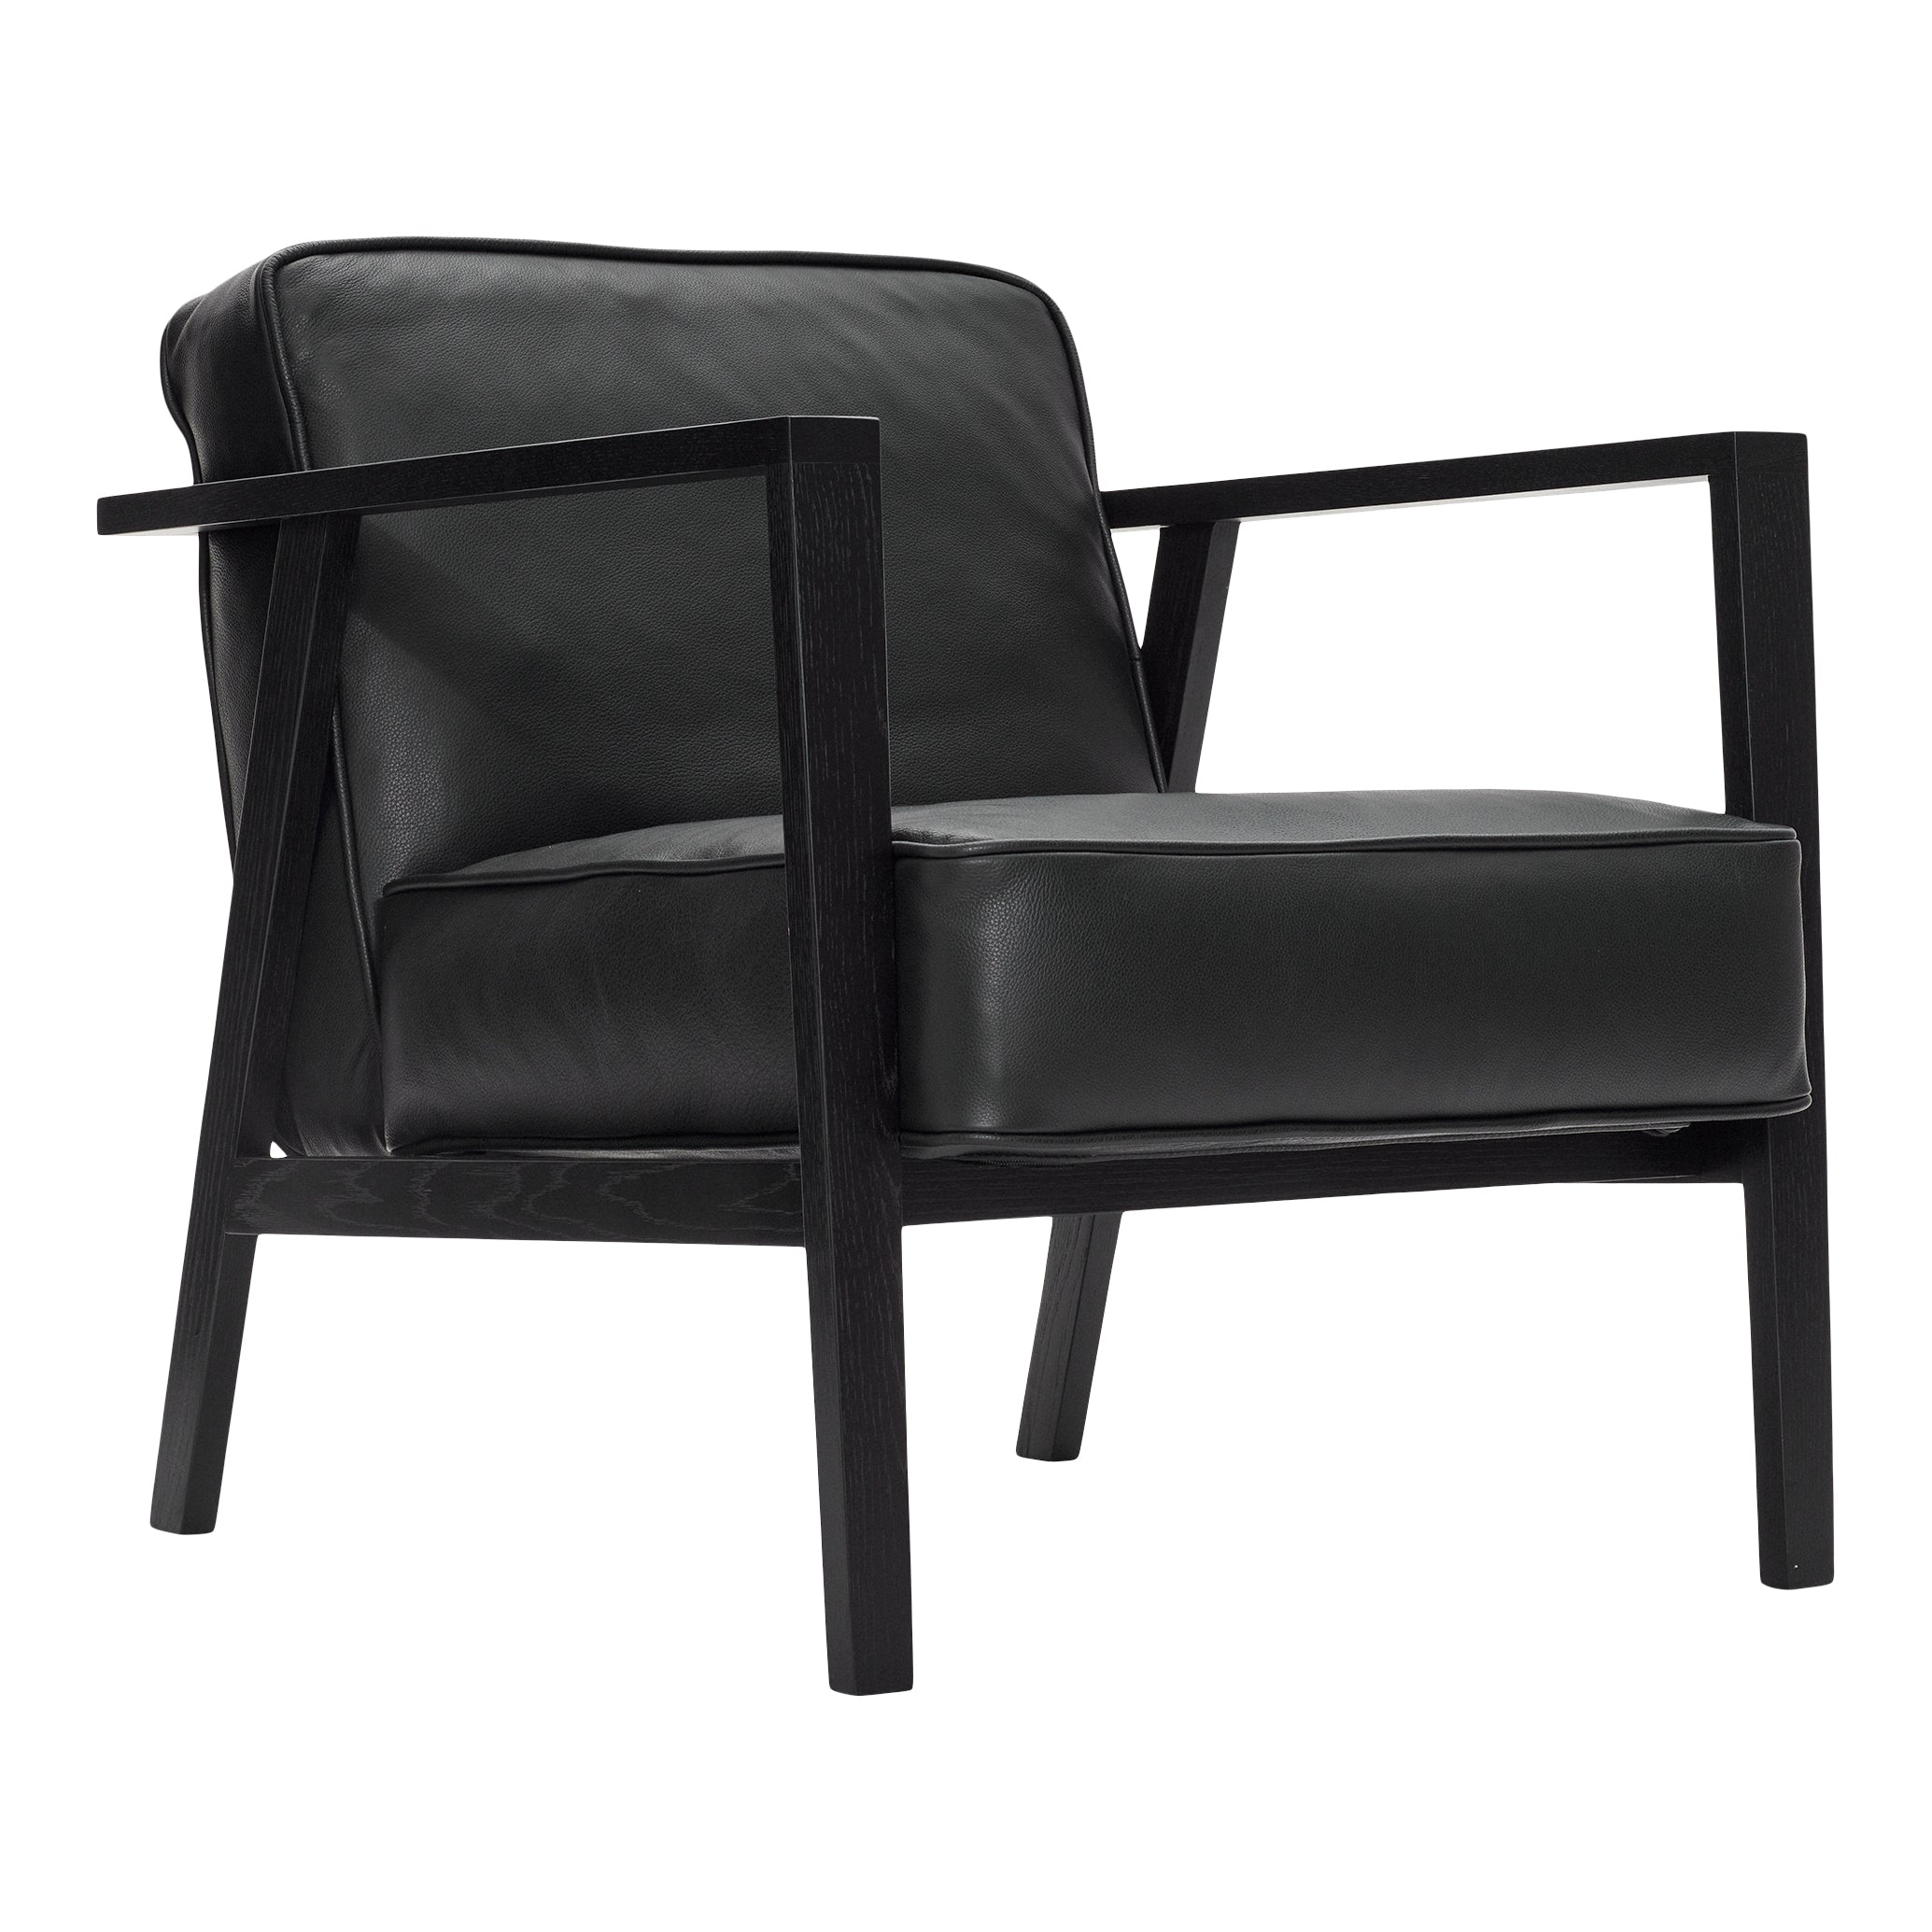 Andersen Furniture - LC1 Lounge chair - Black leather/frame in black lacquered